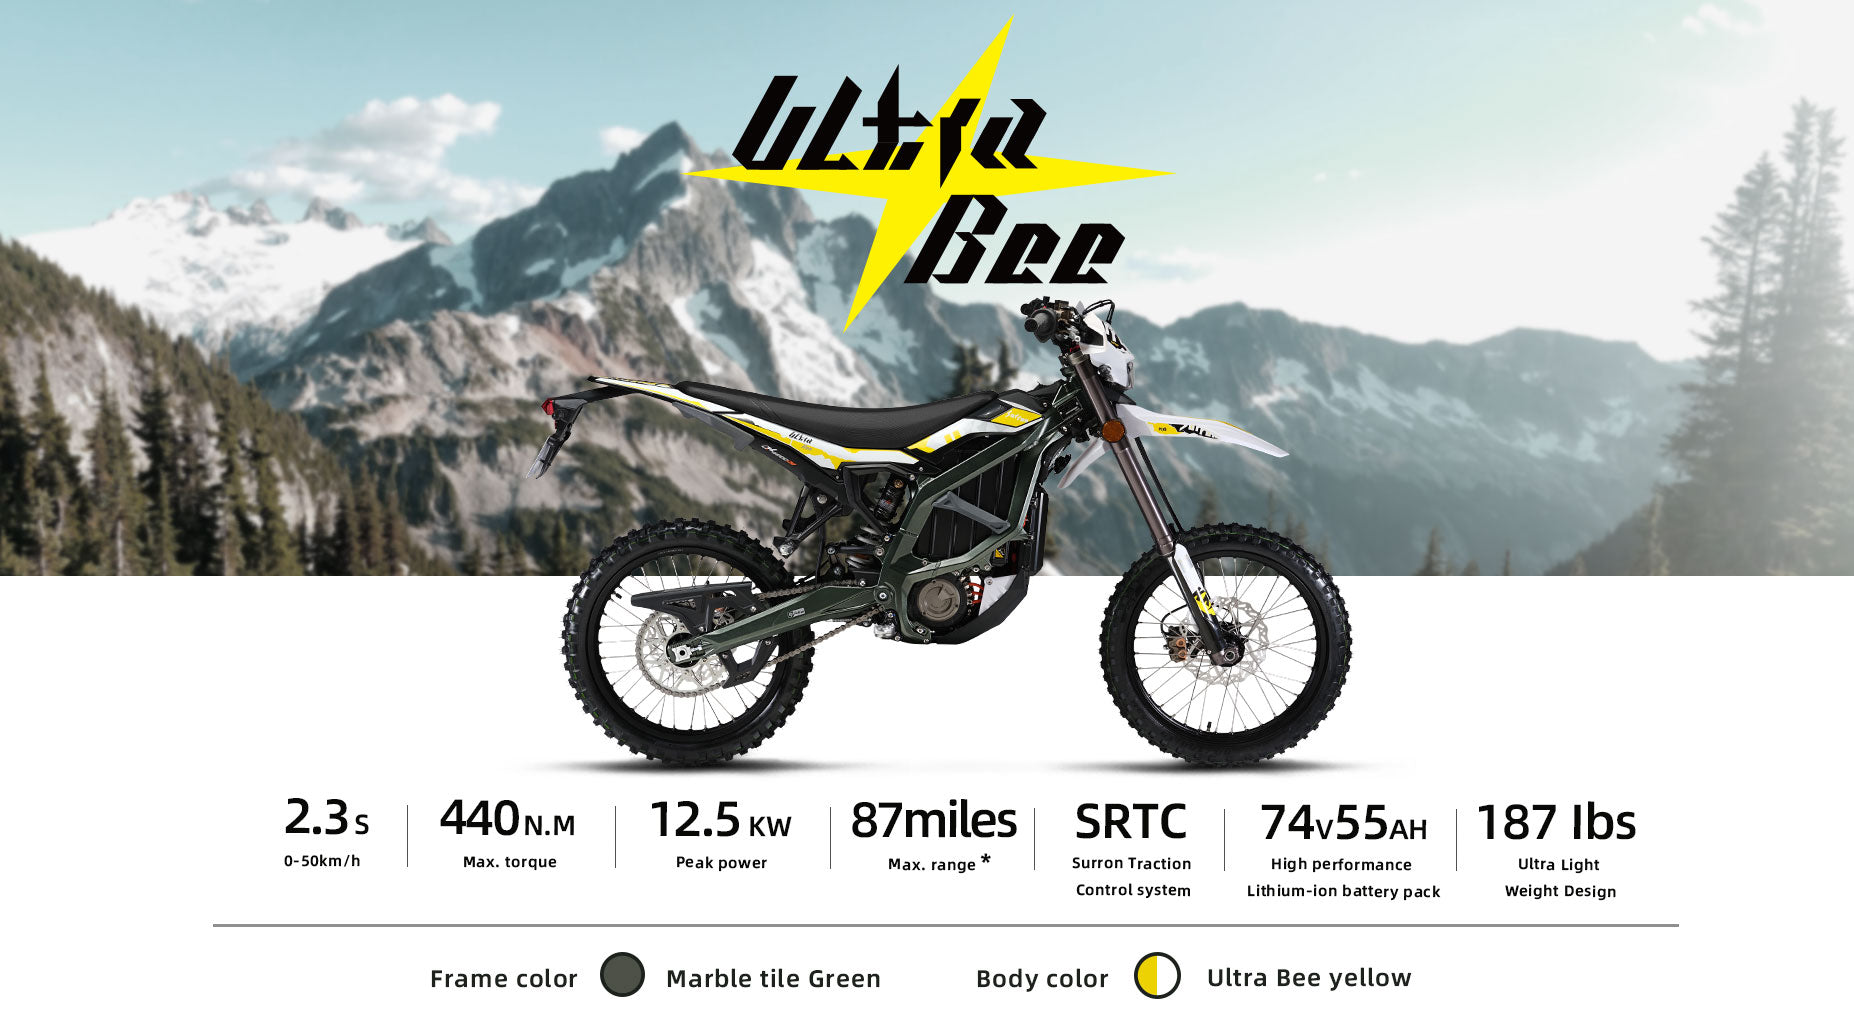 2023 Surron Ultra Bee First Ride Review & Test - Electric Cycle Rider